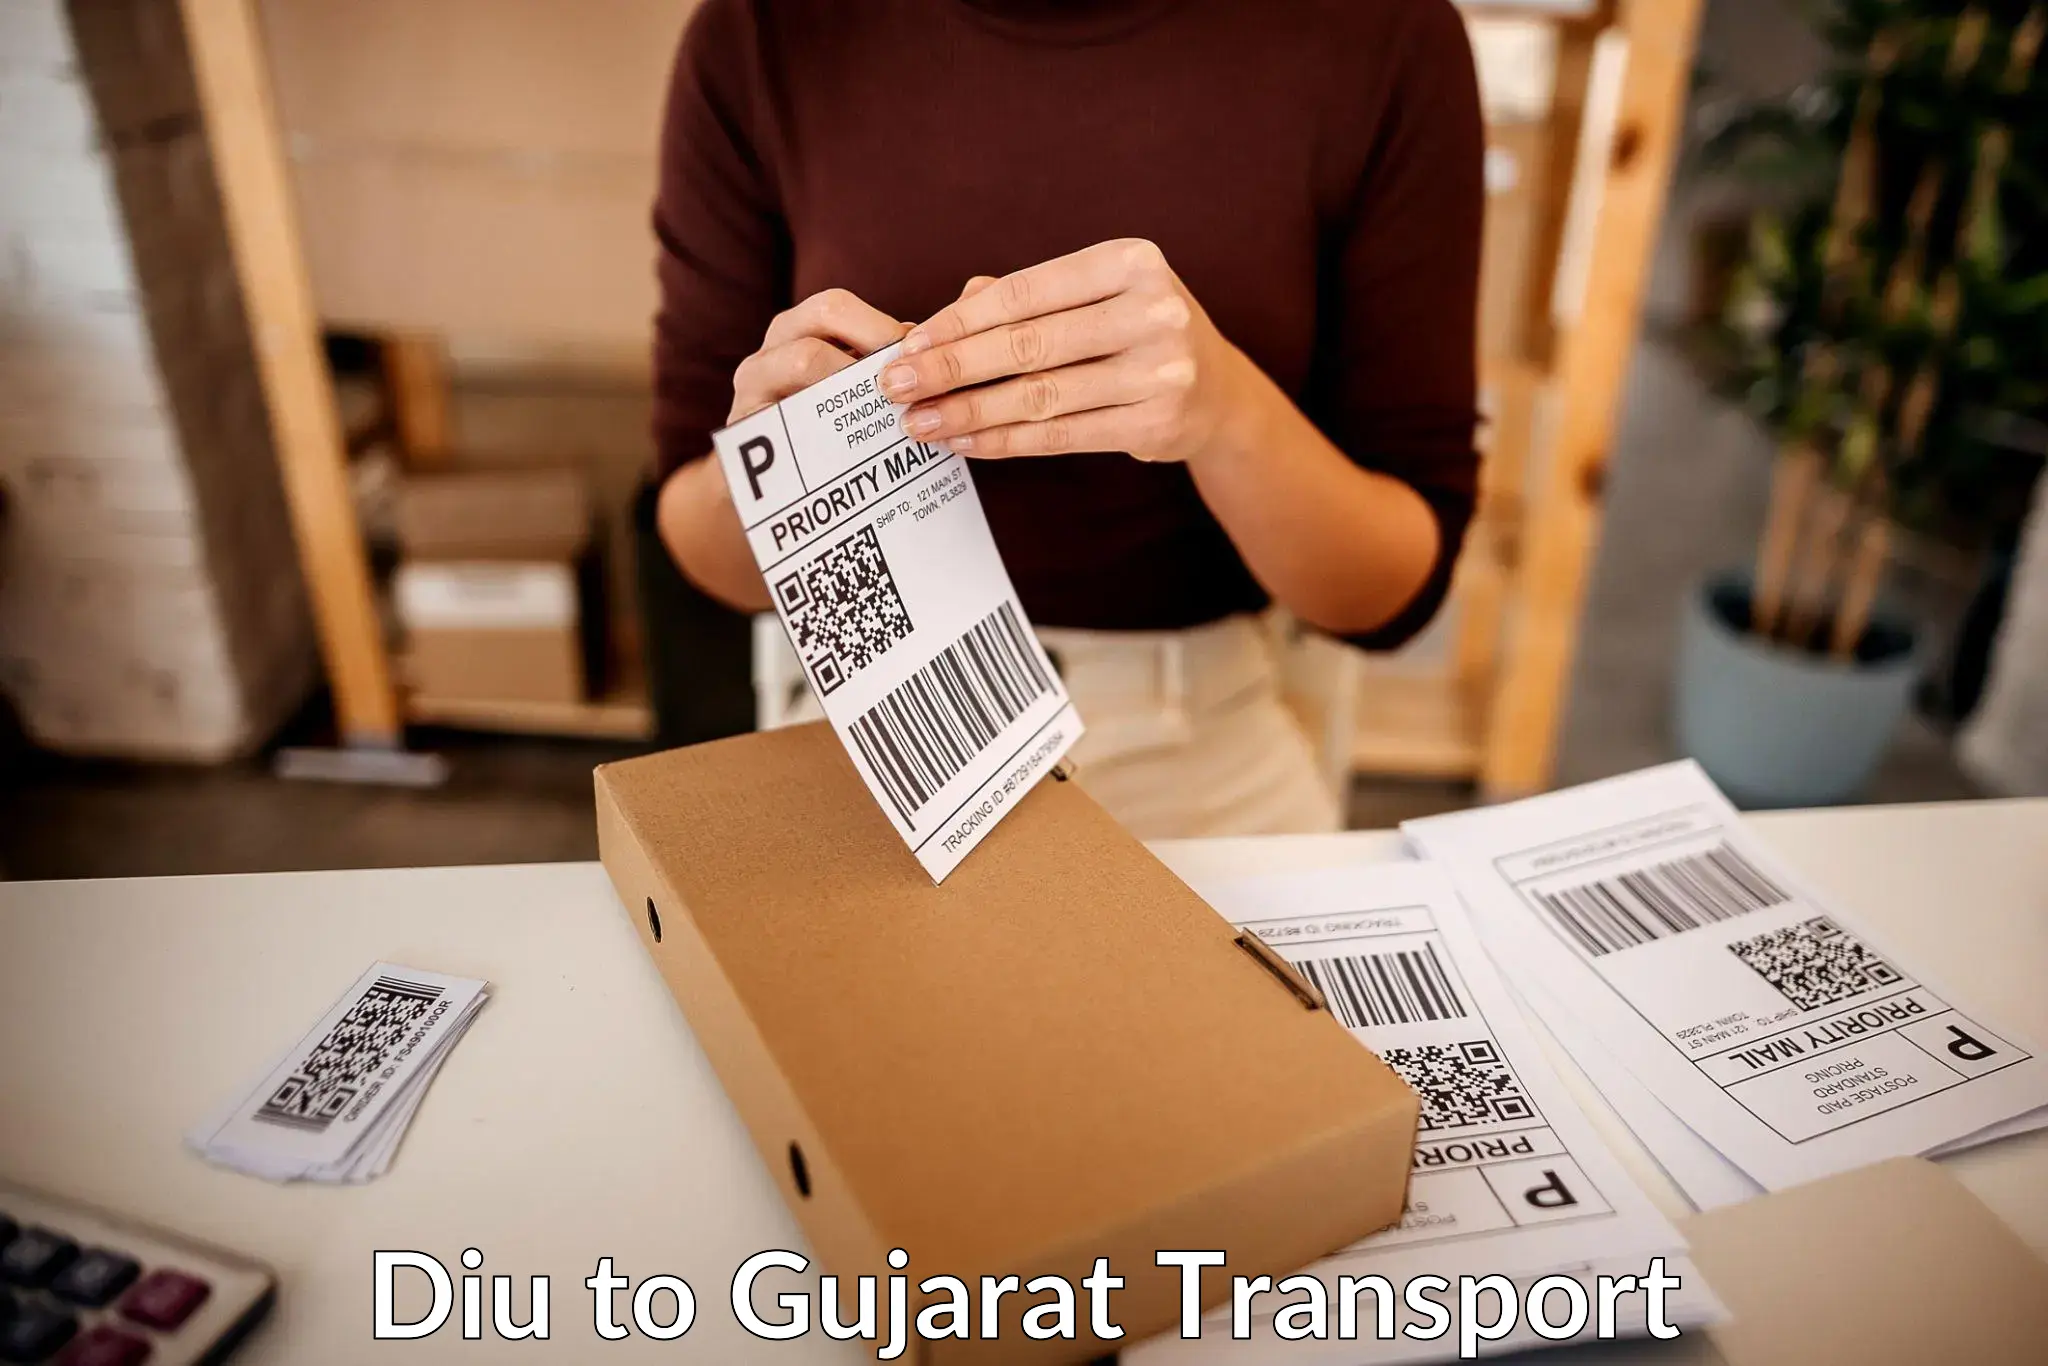 Commercial transport service Diu to Dholera